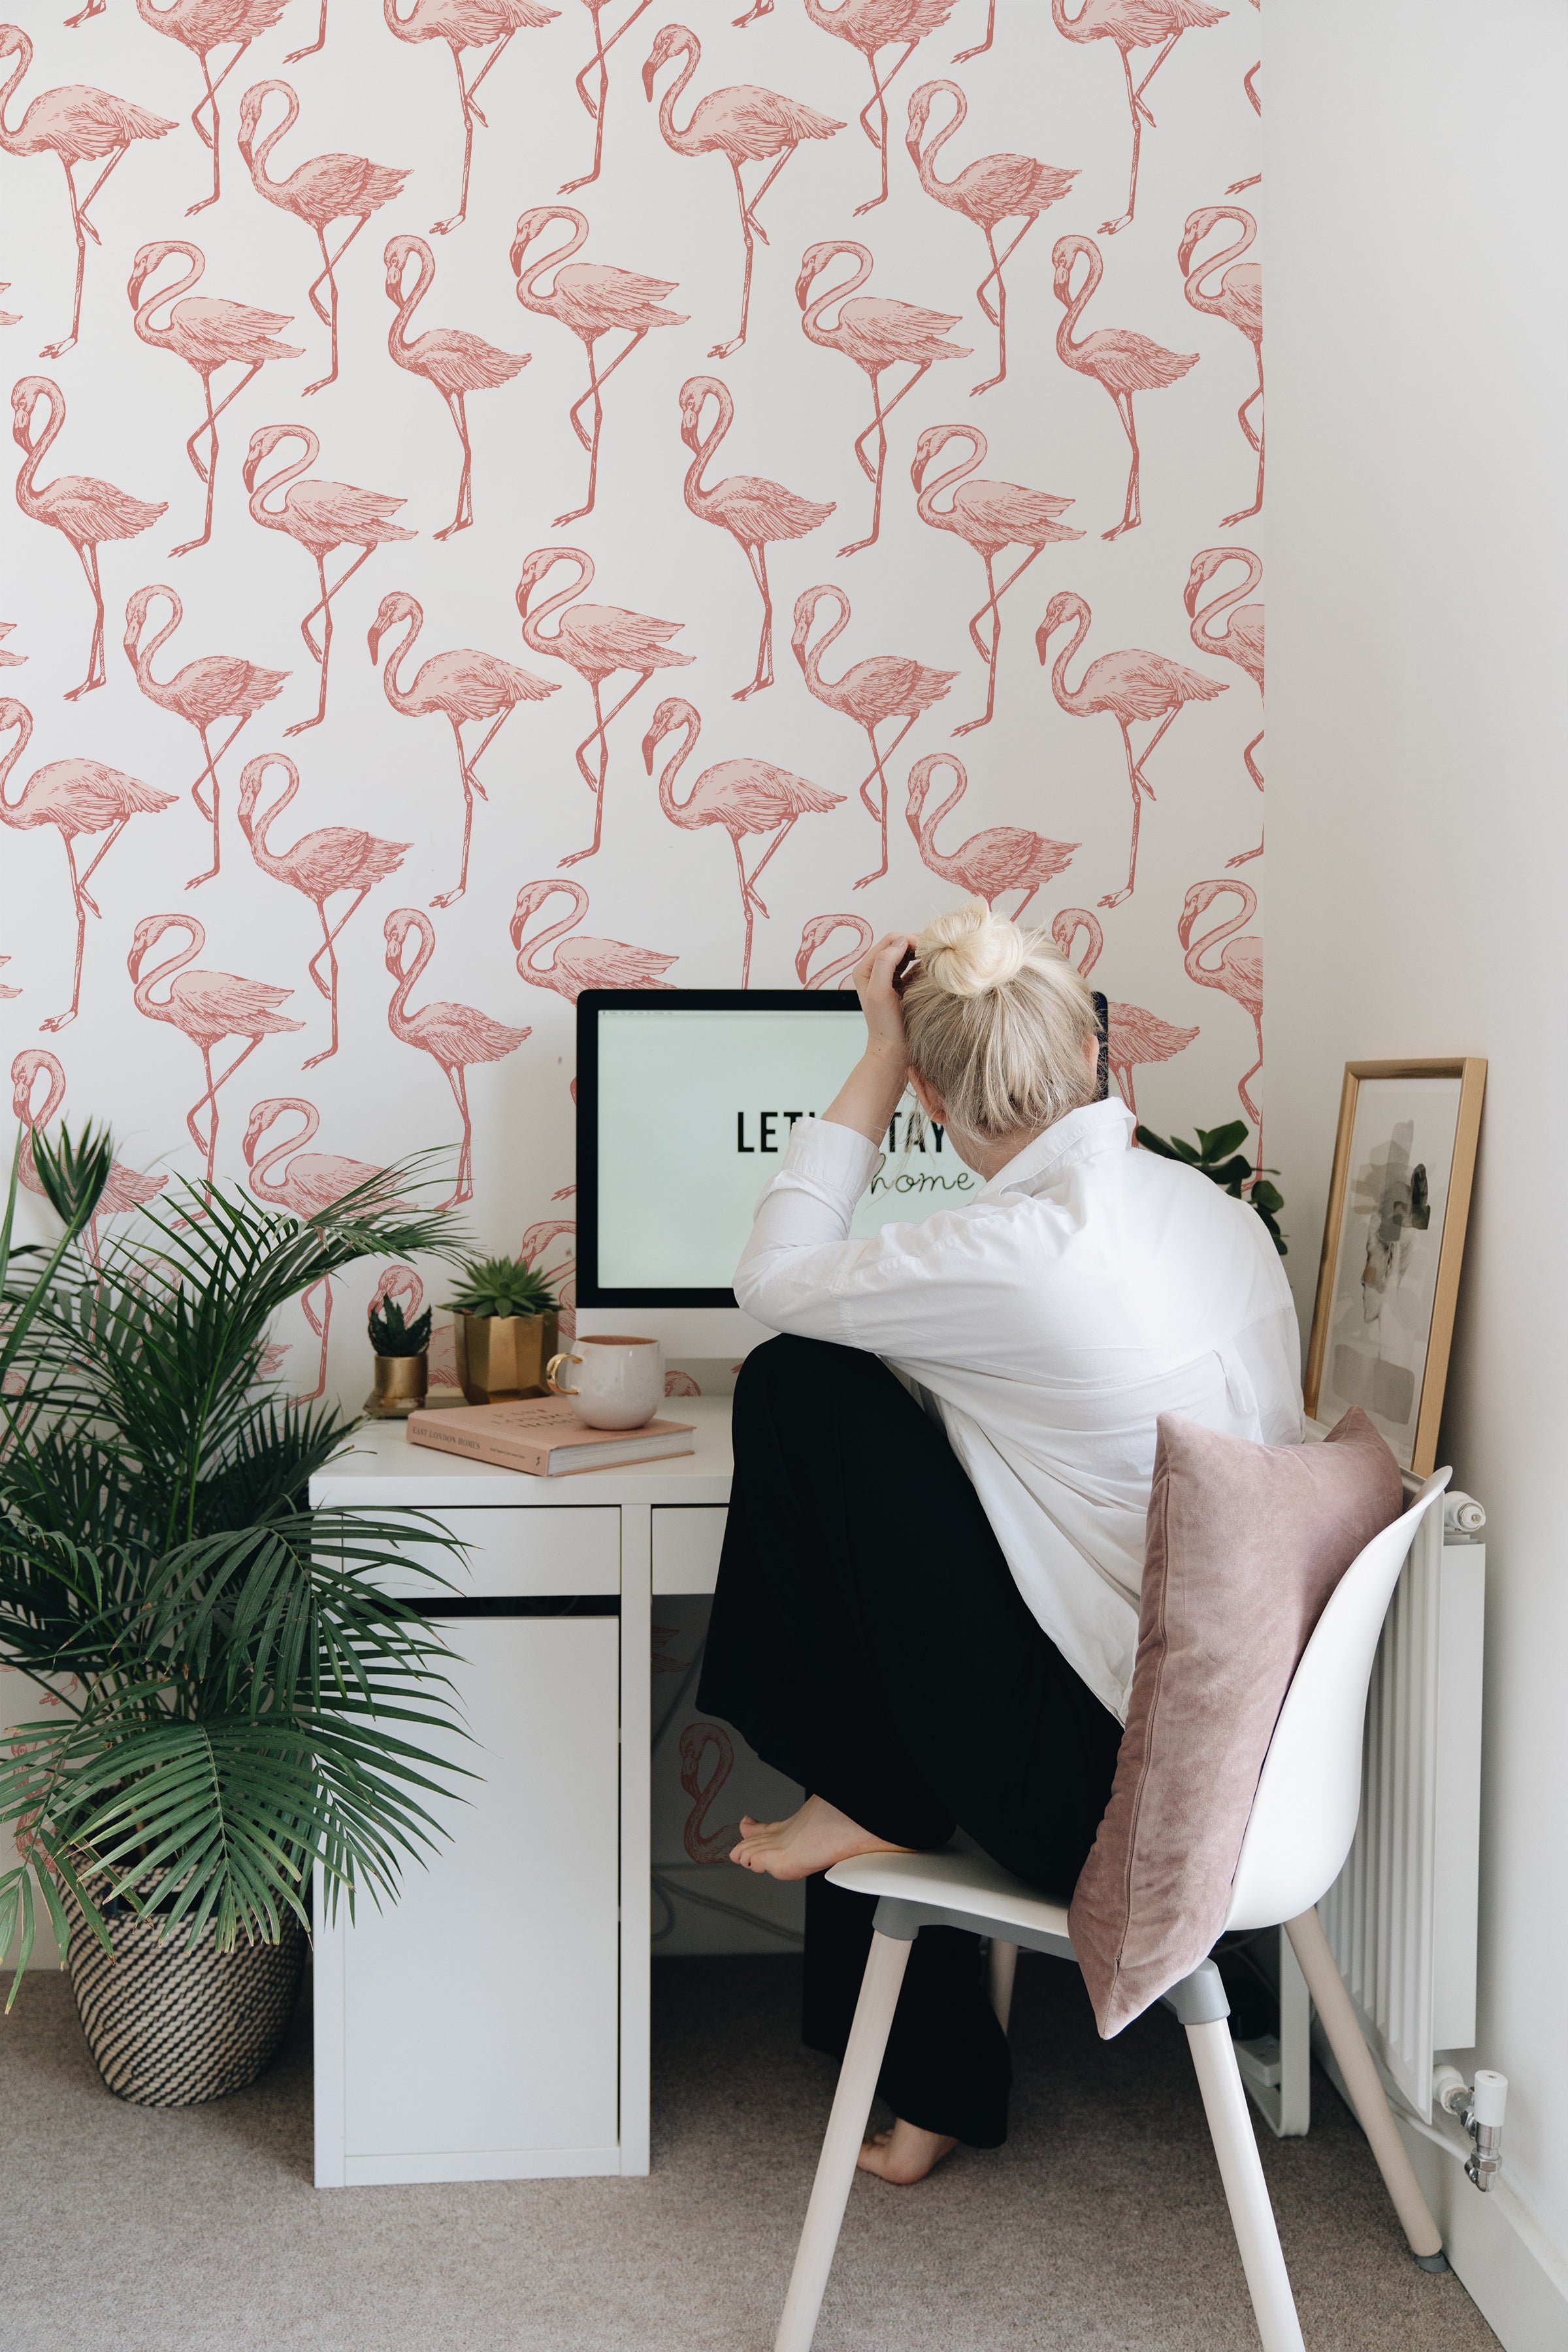 A modern home office setup against a wall adorned with Flamingo Party Wallpaper. A woman, seen from behind, is seated at a white desk with a computer, surrounded by green plants and soft pink accessories that echo the playful and vibrant theme of the flamingo pattern on the wall.